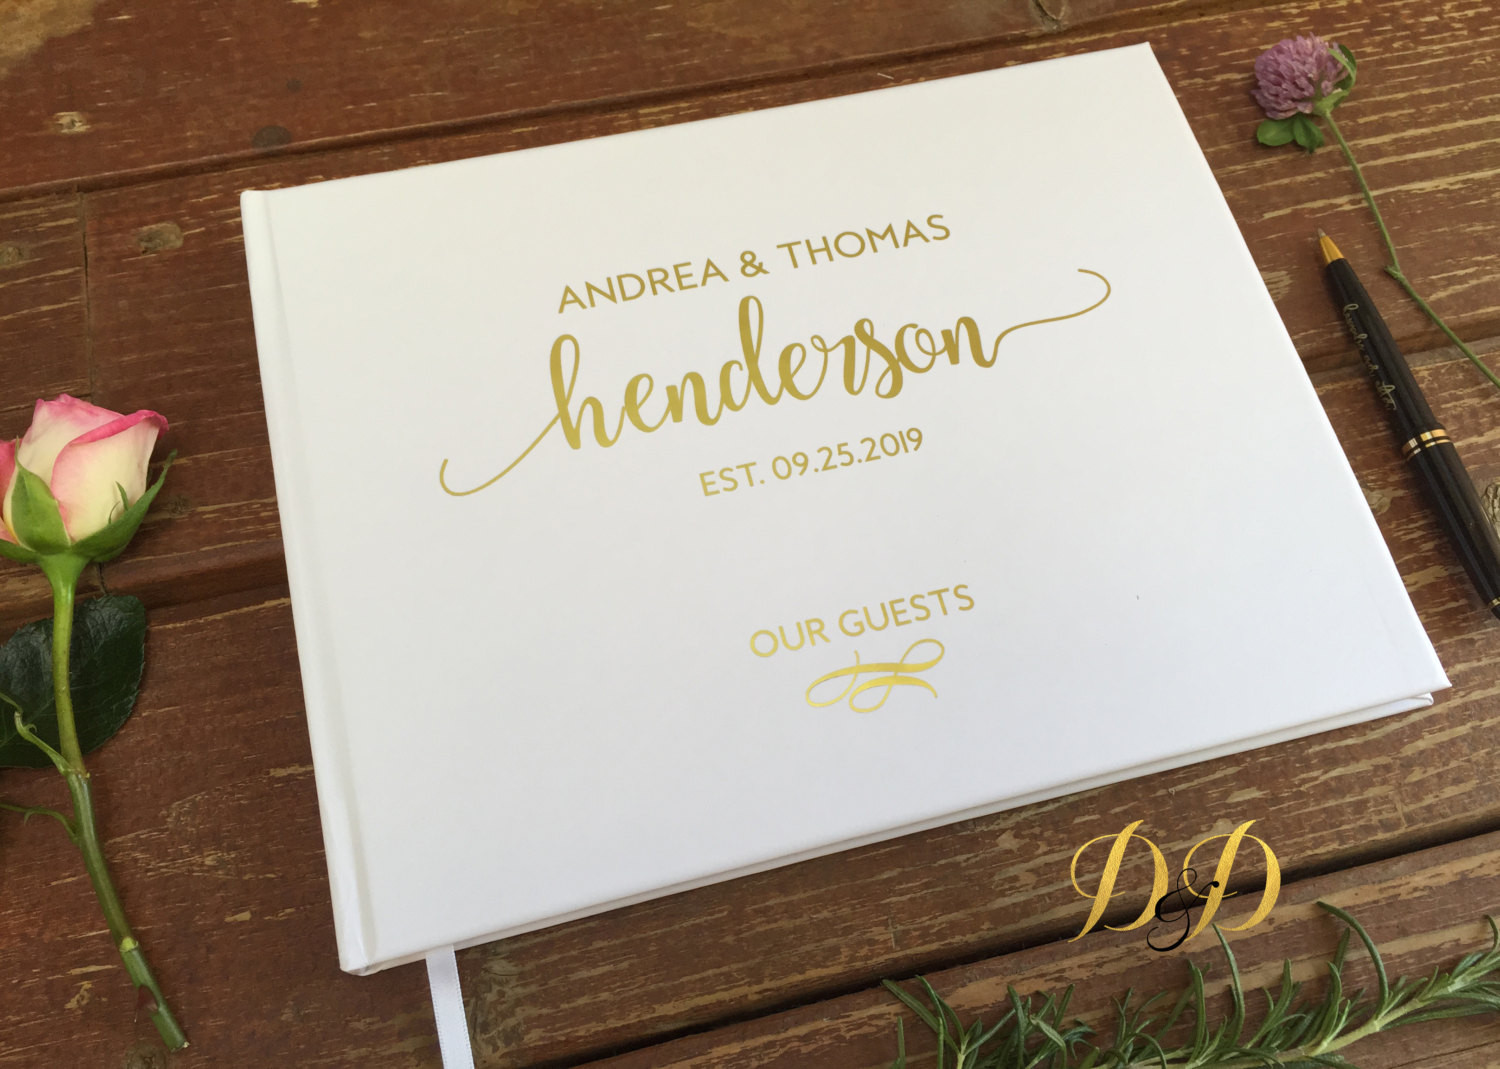 Wedding Guest Book With Photos
 Wedding Guest Book Wedding Guest book White blush cream Real